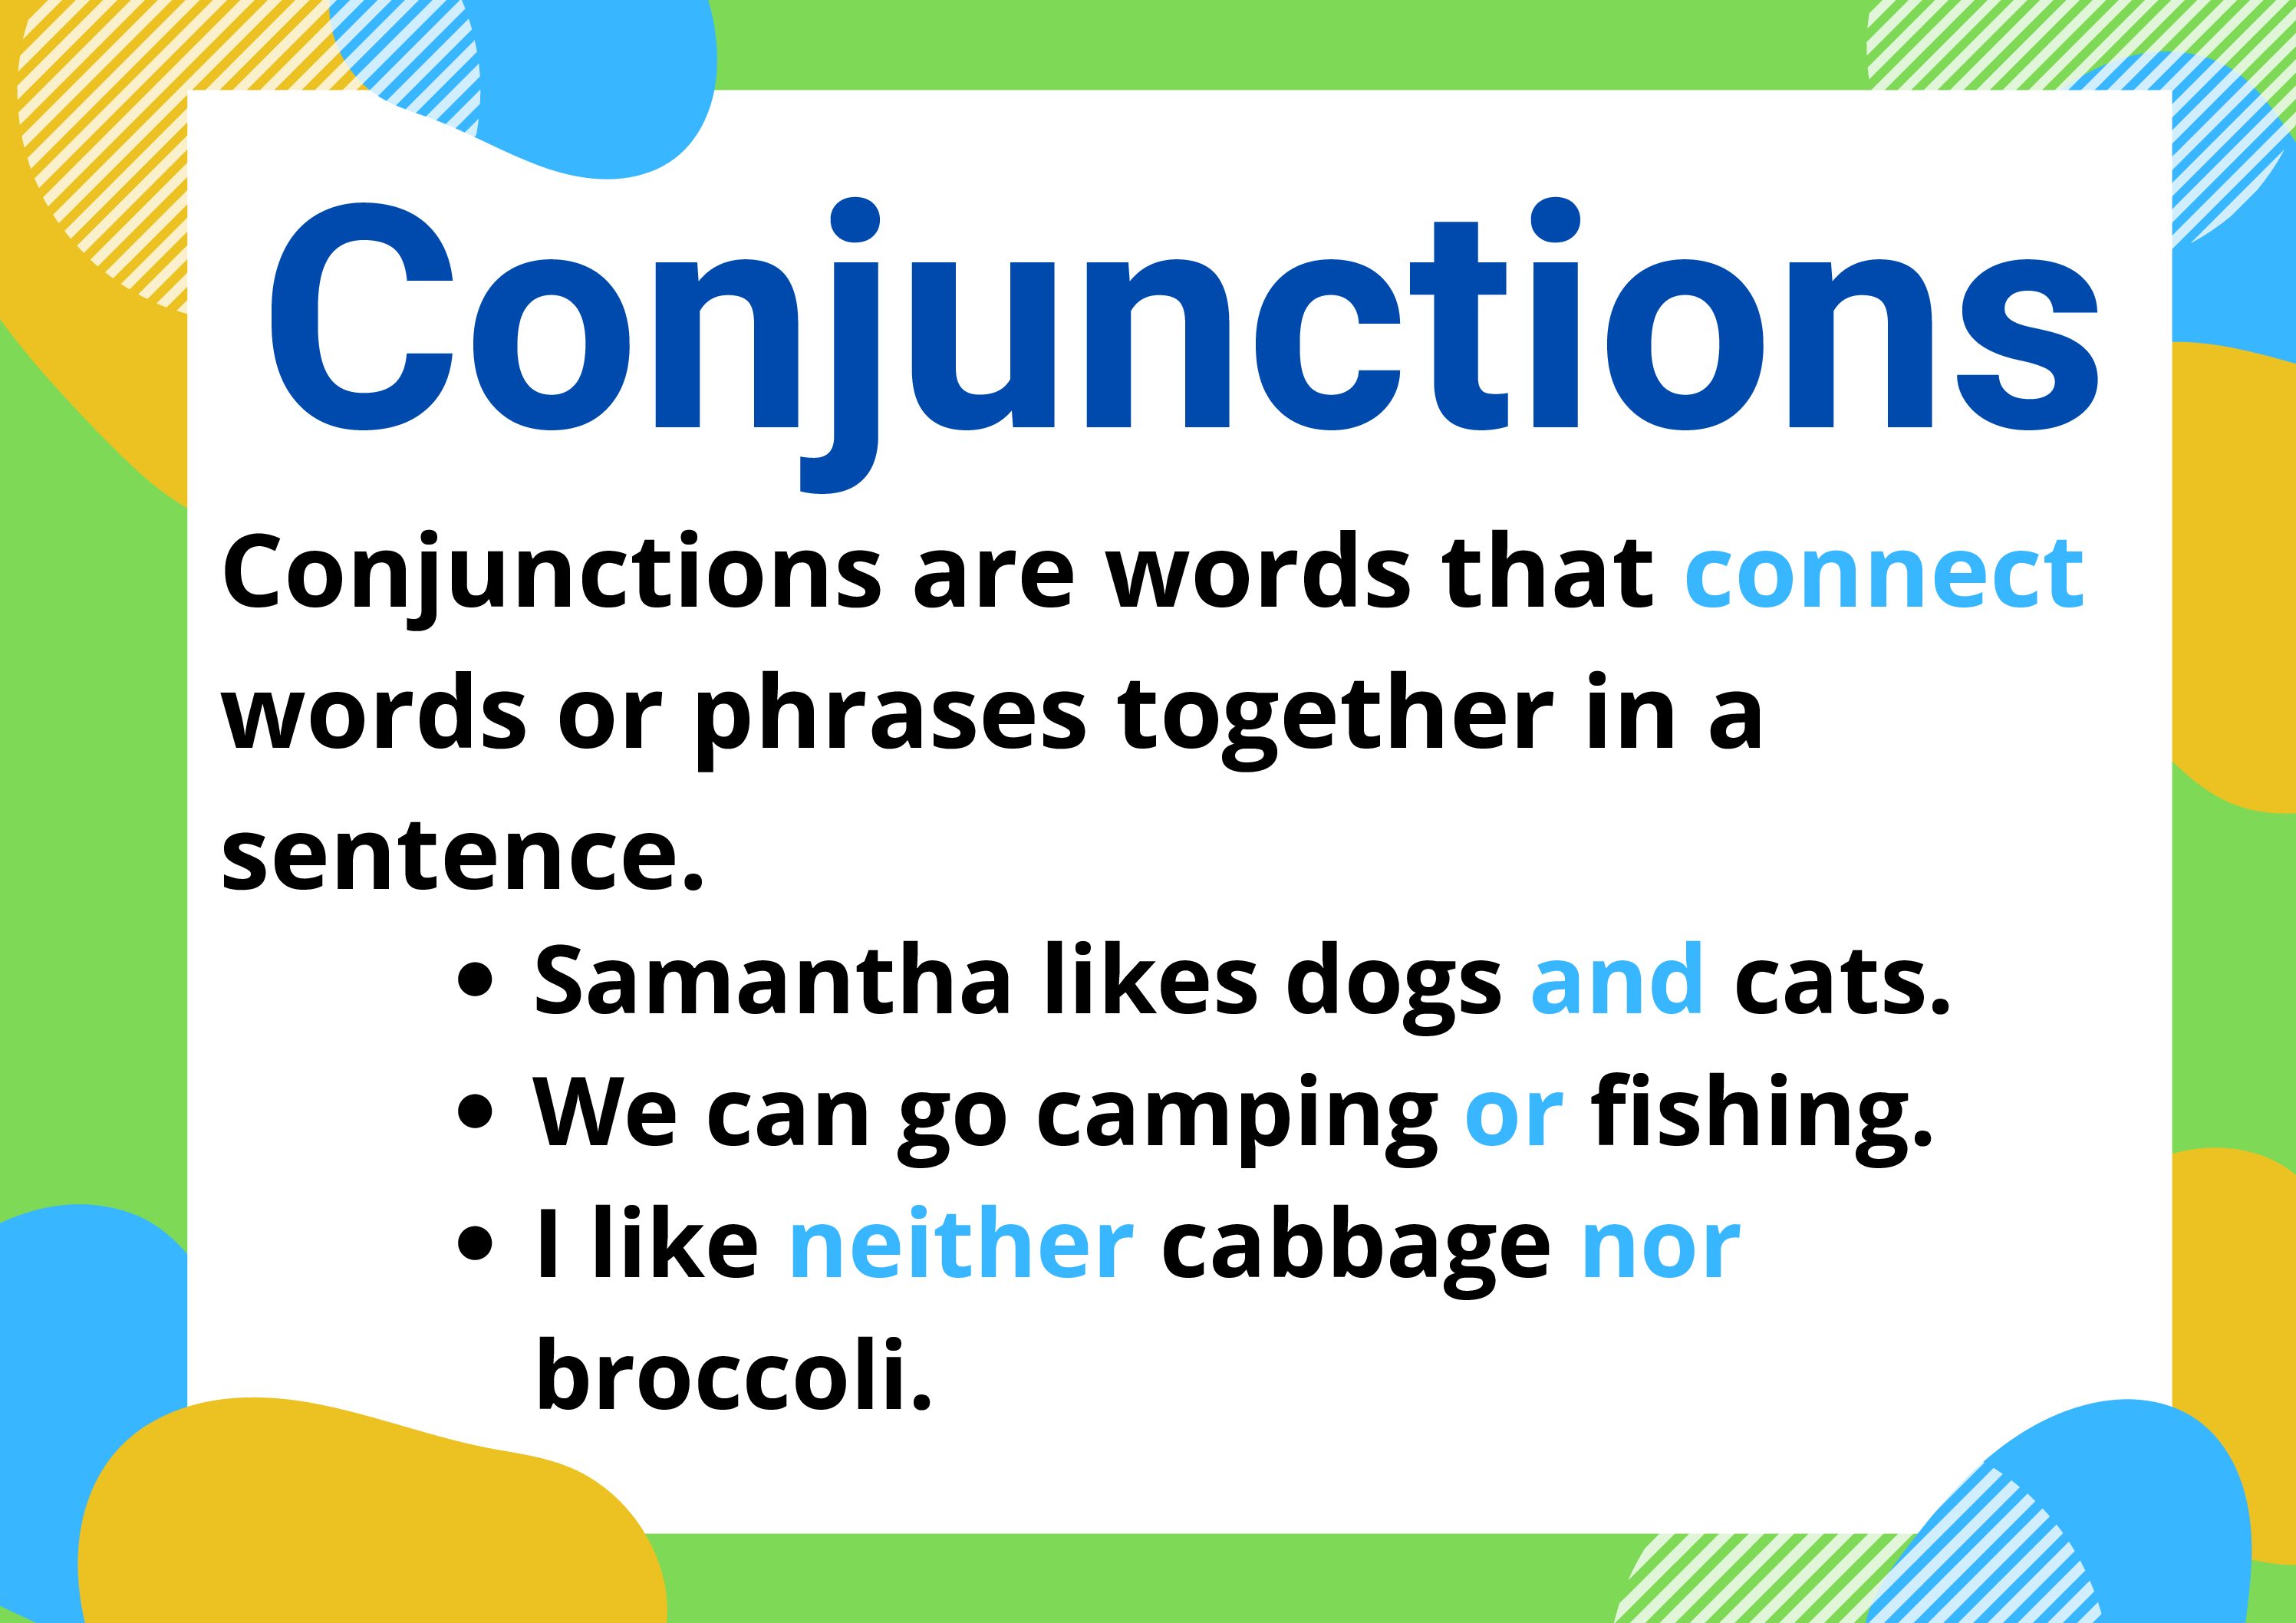 poster-set-prepositions-conjunctions-interjections-teacha